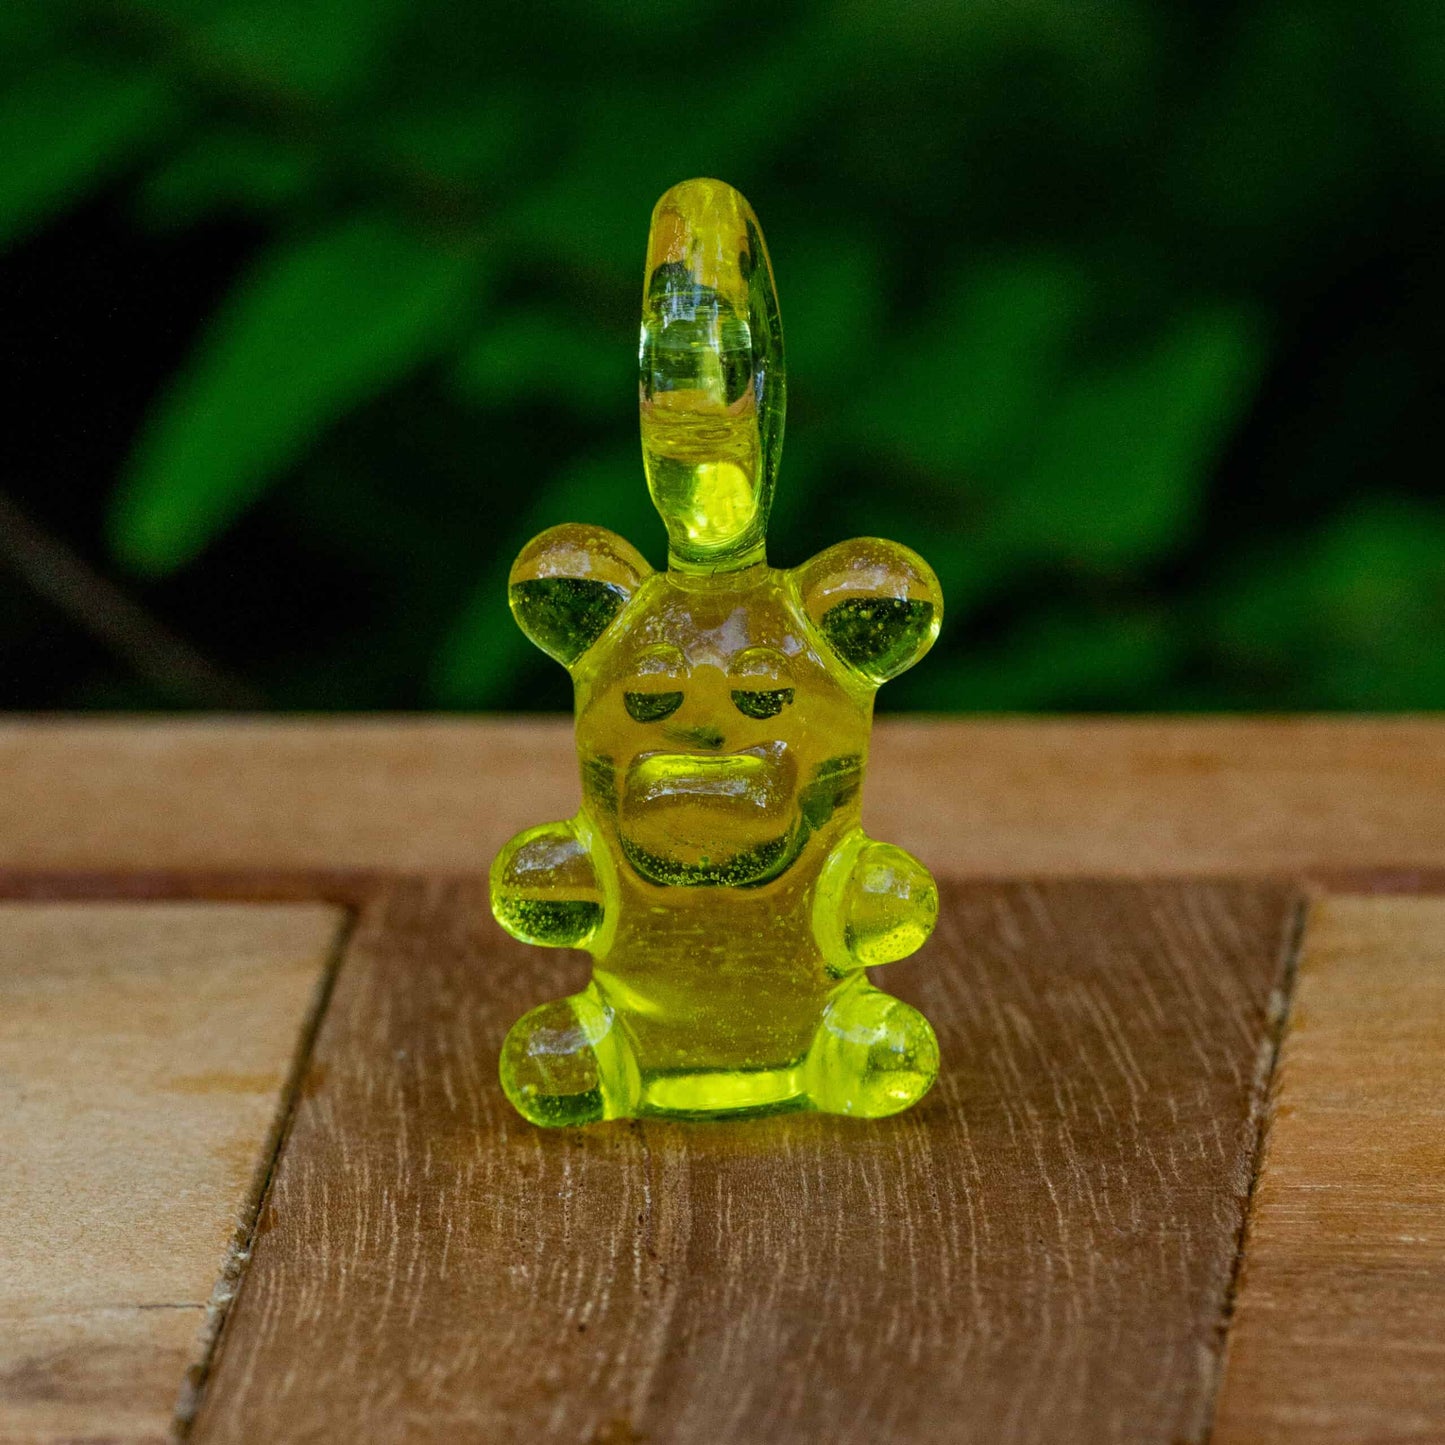 artisan-crafted glass pendant - Solar Flare Heady Bear Pendant by Alexander the Great